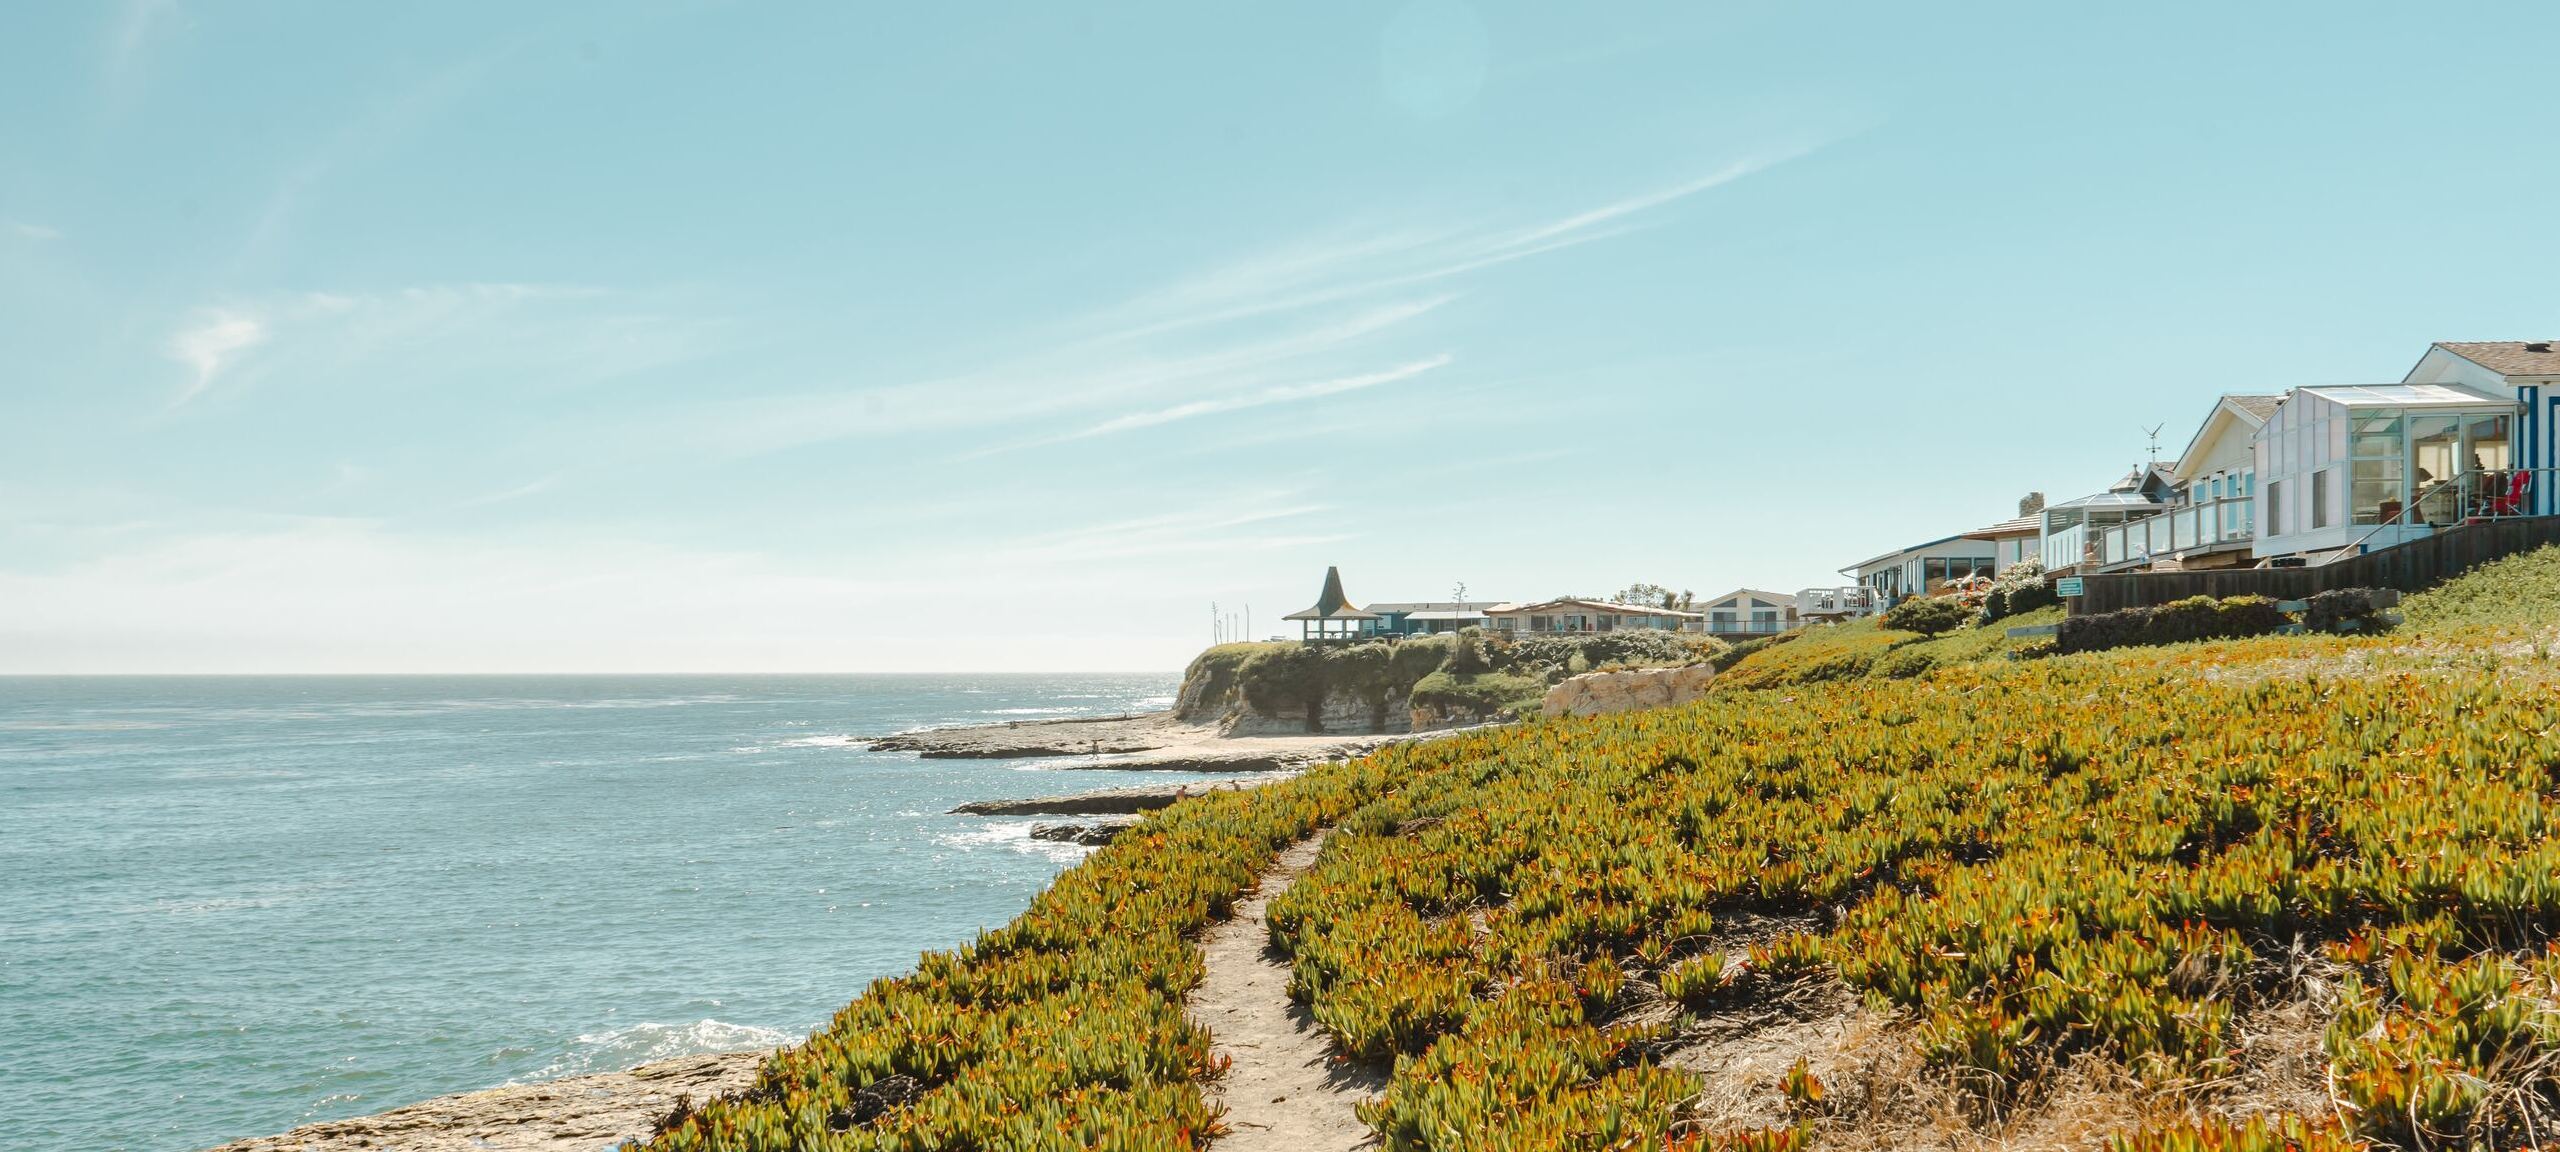 Beachfront luxury homes in Santa Cruz, CA from view of rocks. Photo by Taylor Cole on Unsplash